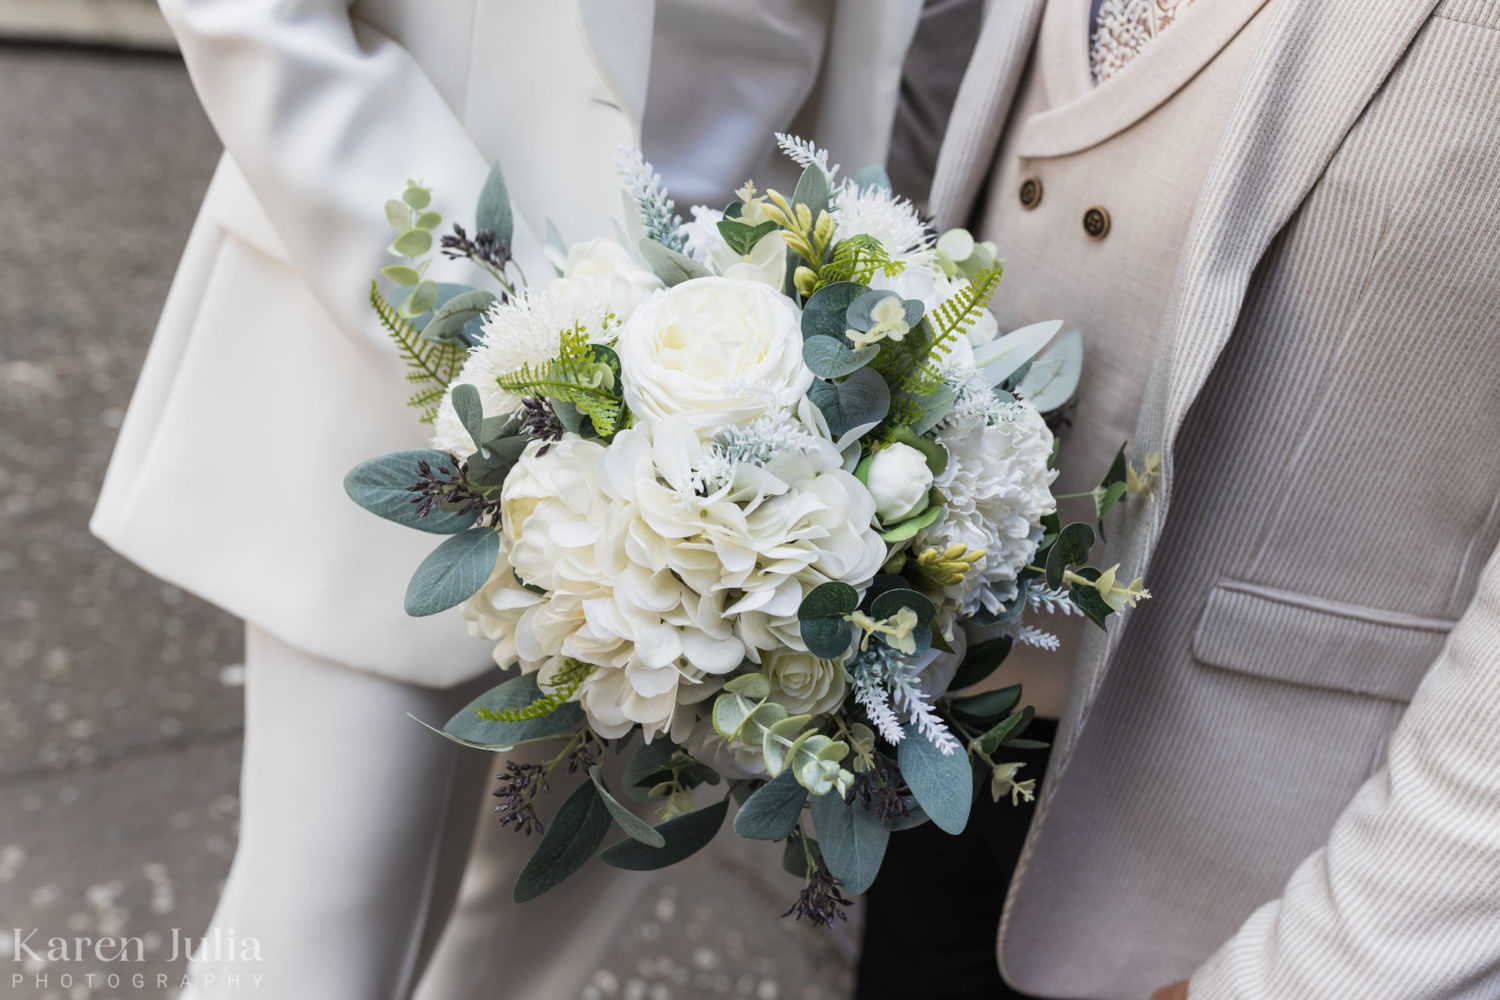 brides ivory bouquet being held in front of her stylish white suit